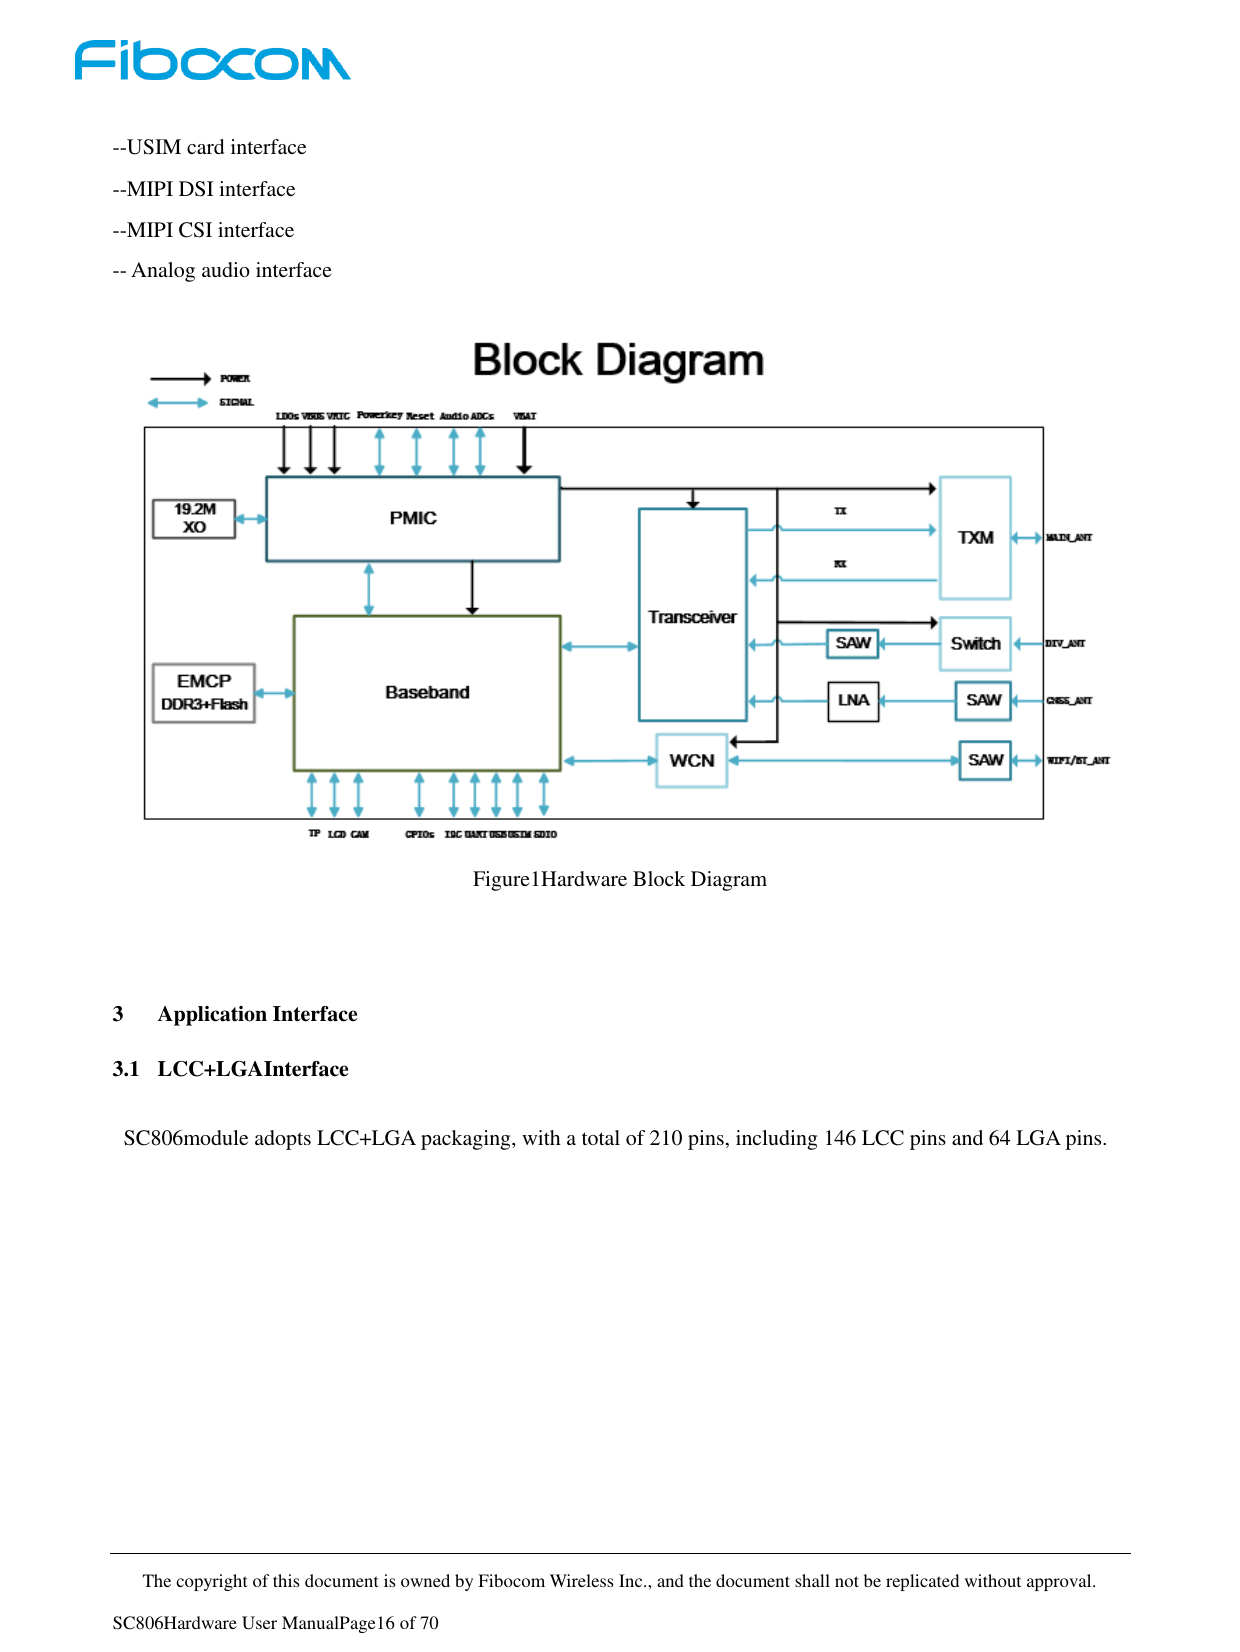     The copyright of this document is owned by Fibocom Wireless Inc., and the document shall not be replicated without approval.   SC806Hardware User ManualPage16 of 70 --USIM card interface --MIPI DSI interface --MIPI CSI interface -- Analog audio interface   Figure1Hardware Block Diagram   3 Application Interface 3.1 LCC+LGAInterface SC806module adopts LCC+LGA packaging, with a total of 210 pins, including 146 LCC pins and 64 LGA pins.  